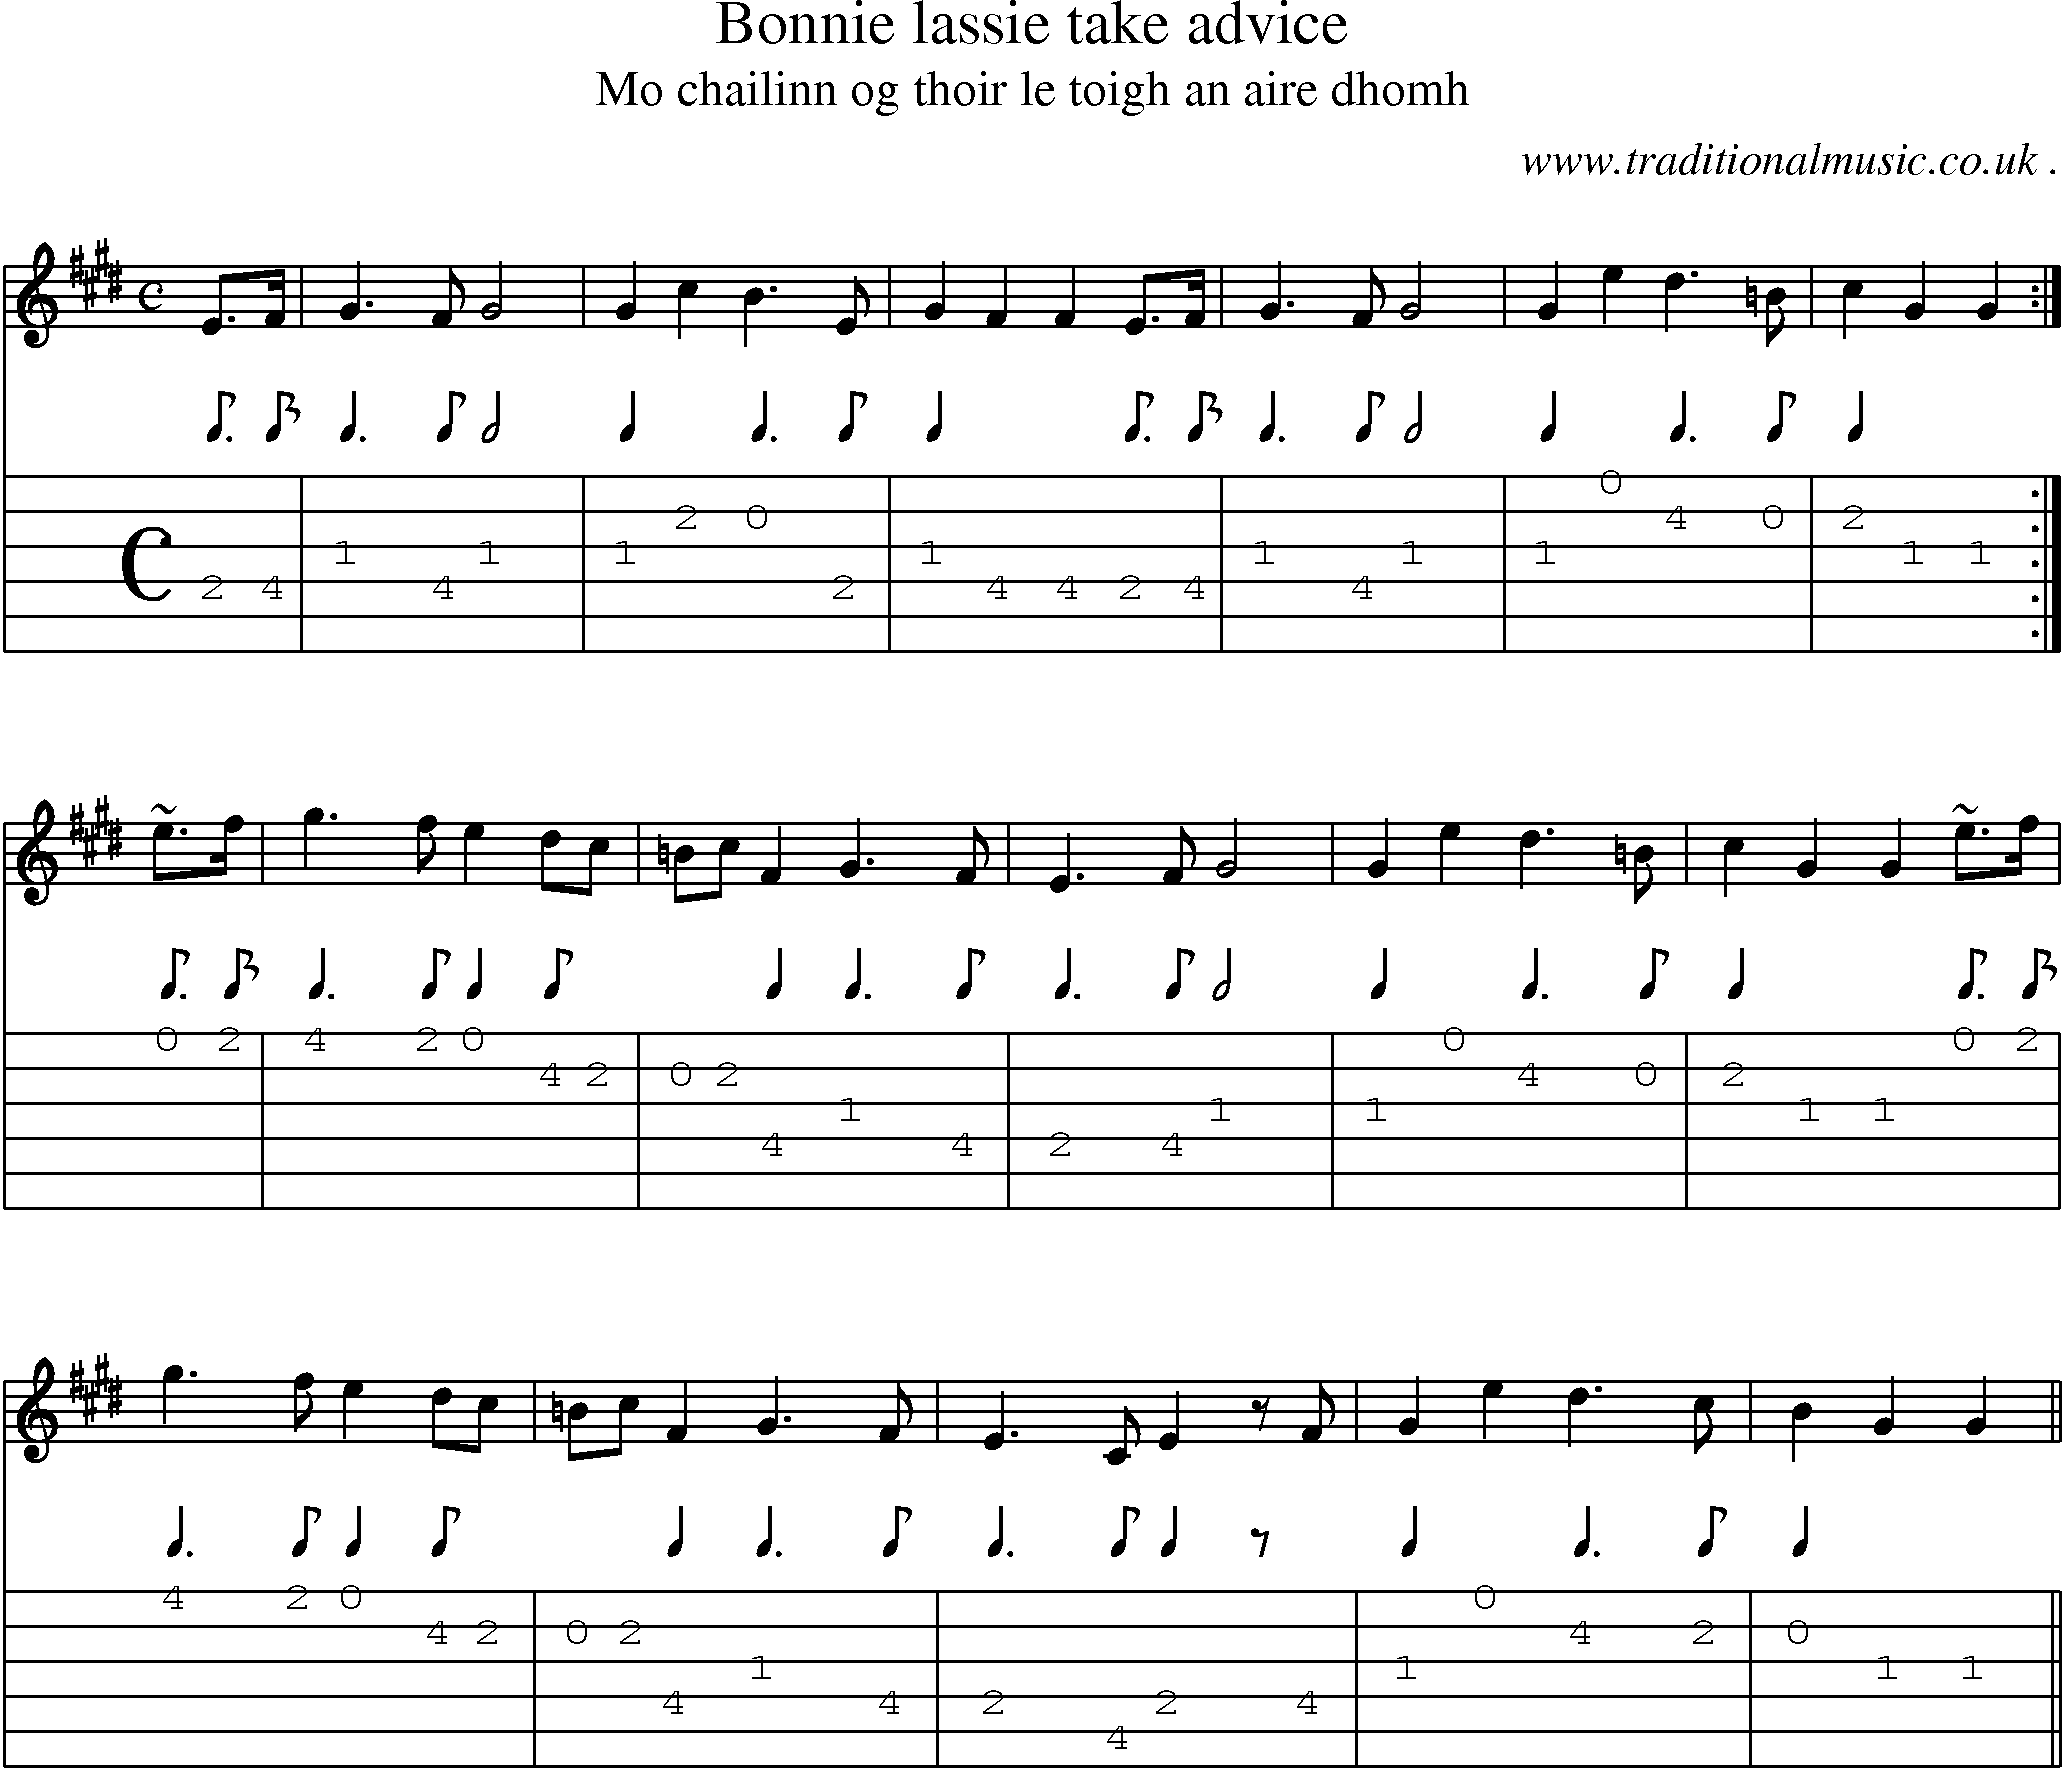 Sheet-music  score, Chords and Guitar Tabs for Bonnie Lassie Take Advice